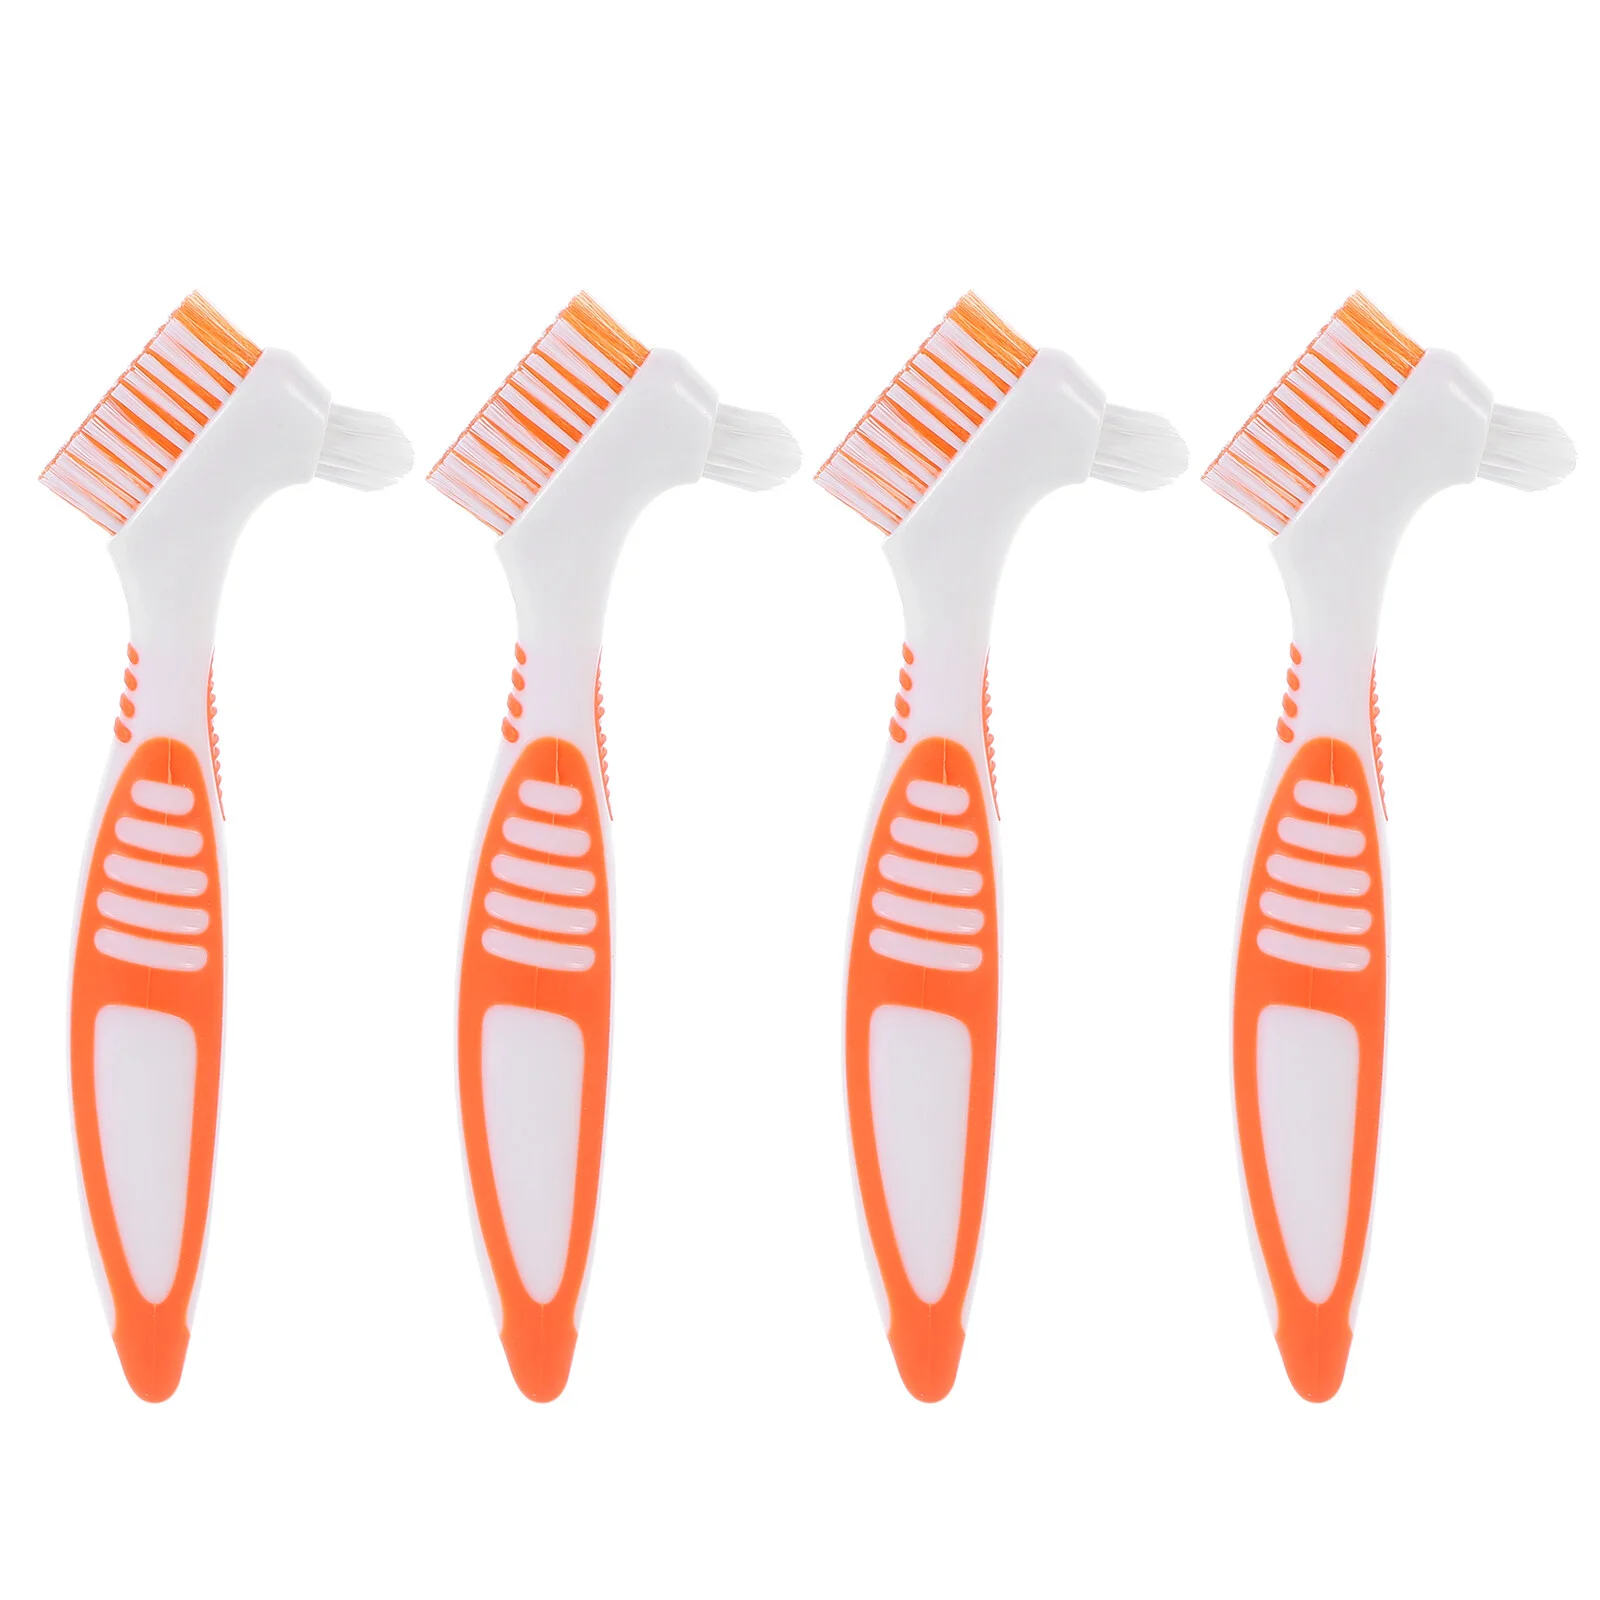 

Interdental Brush Portable Toothbrushes Useful Denture Cleaning Teeth Personal Household Extra Soft